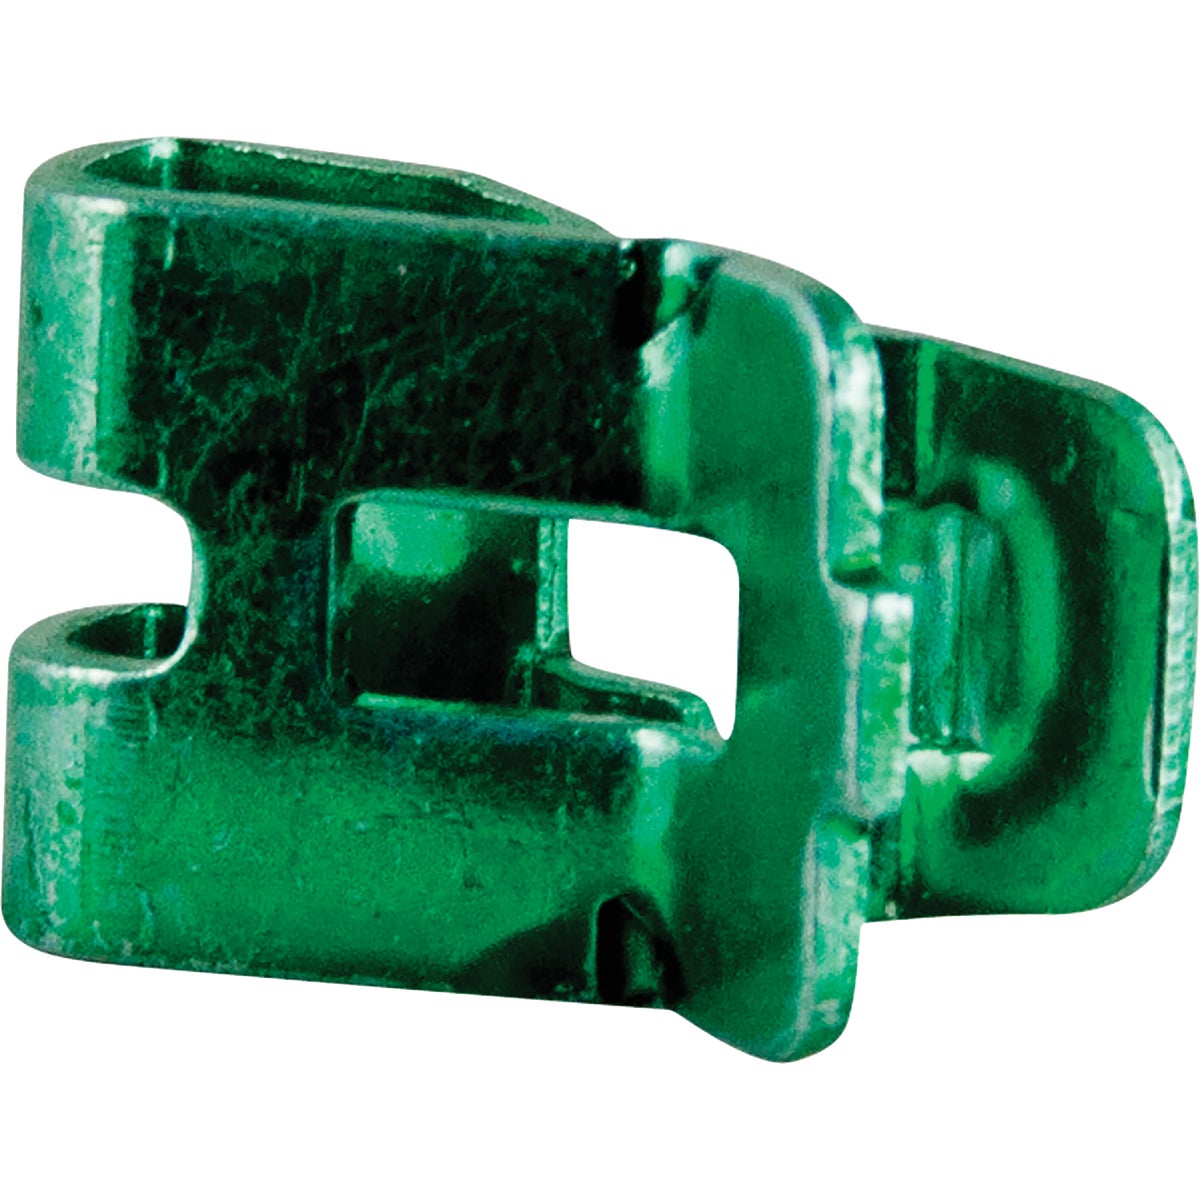 Item 518840, Zinc-plated grounding clamp. Ideal for No. 10, No. 12, or No.